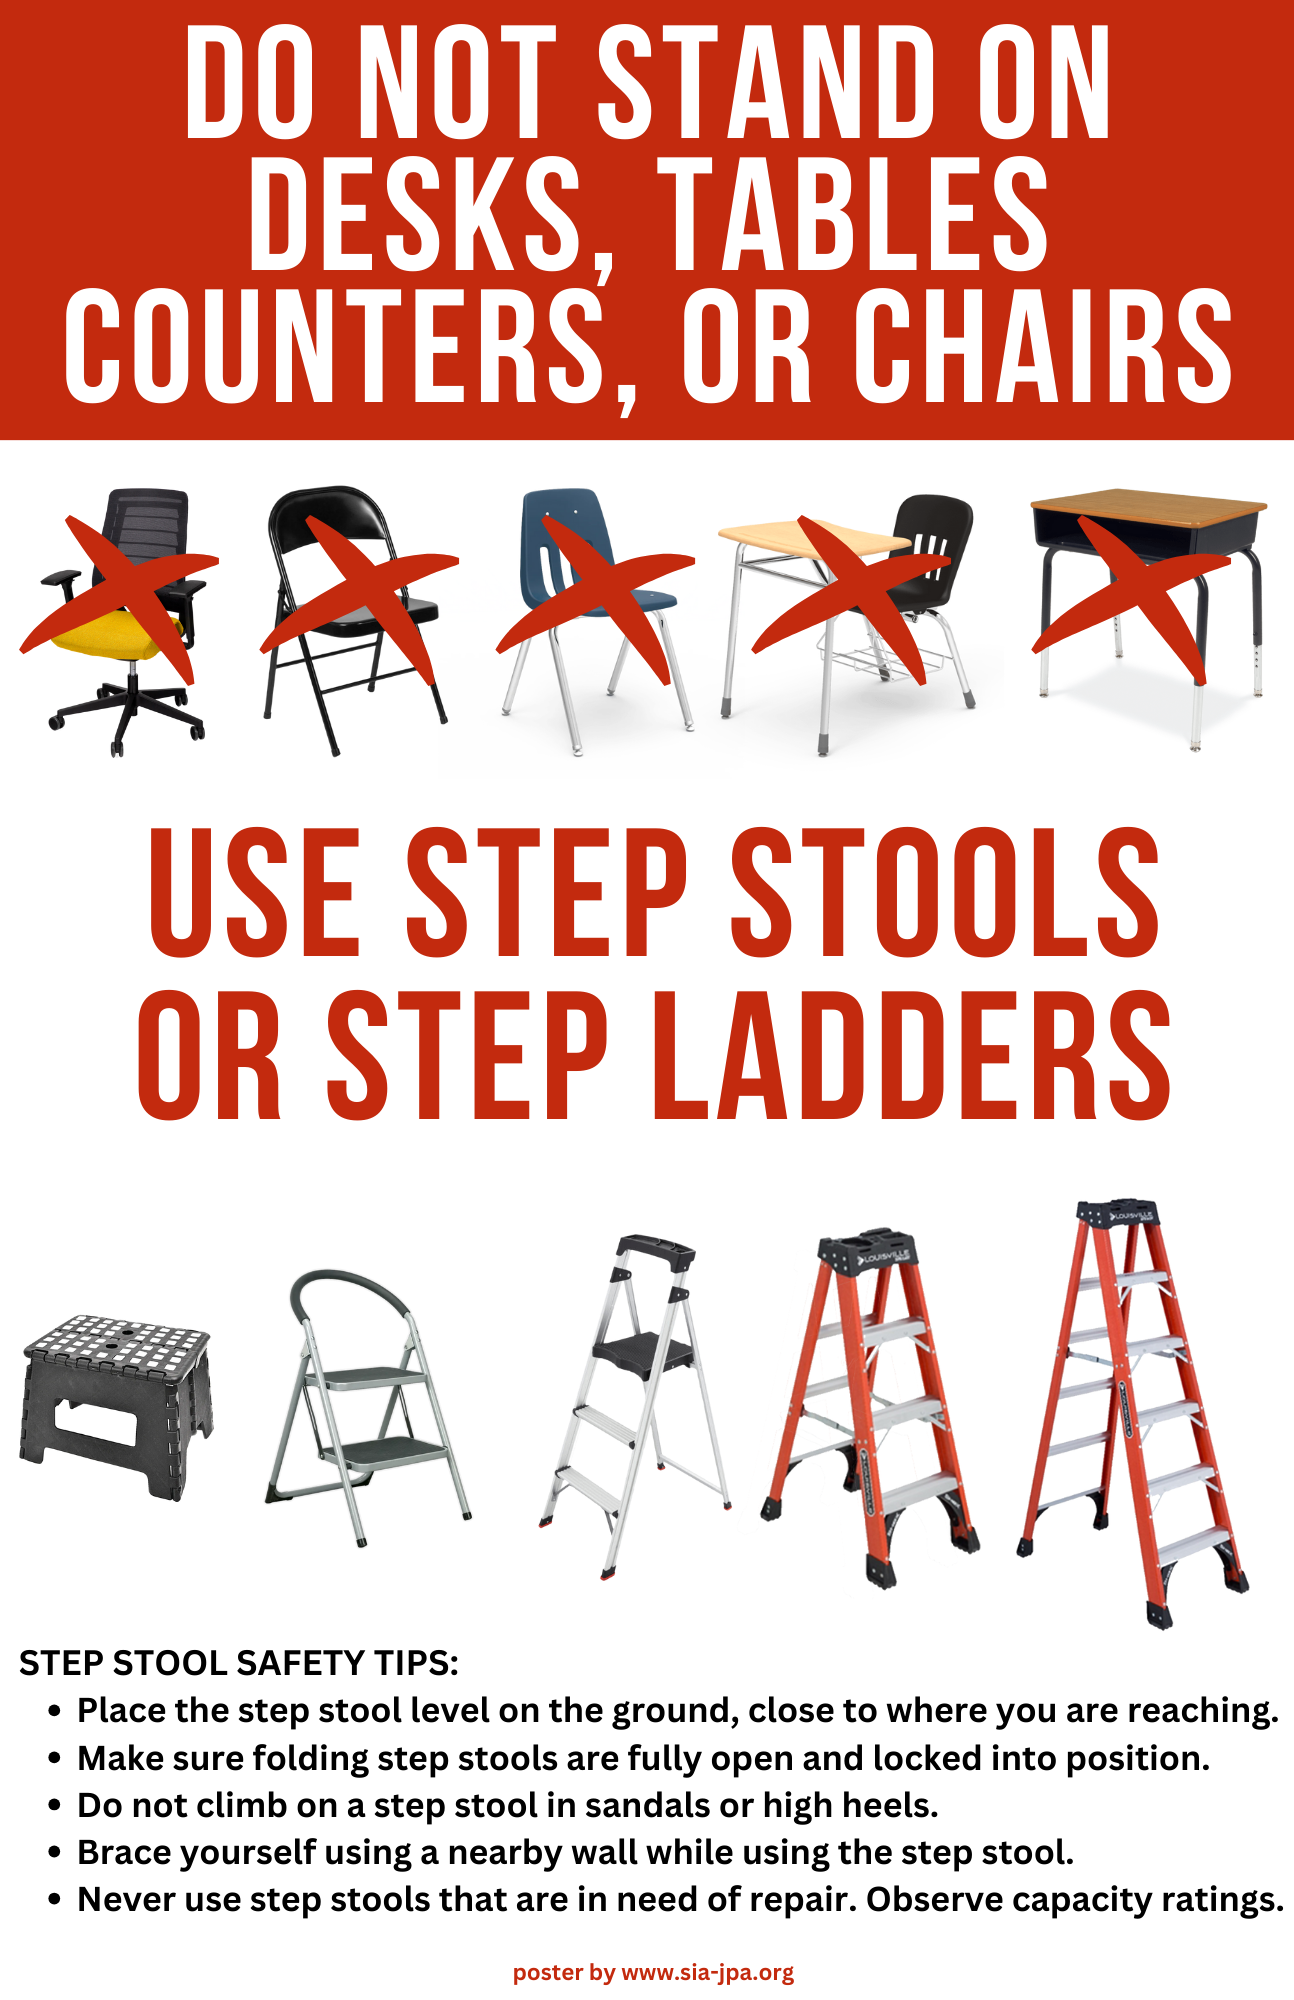 DO NOT STAND ON DESKS, TABLES, COUNTERS, OR CHAIRS. Use Step Stools or Step Ladders. Step Stool Safety Tips:
•	Place the step stool level on the ground, close to where you are reaching.
•	Make sure folding step stools are fully open and locked into position.
•	Do not climb on a step stool in sandals or high heels.
•	Brace yourself using a nearby wall while using the step stool.
•	Never use step stools that are in need of repair. Observe capacity ratings.
poster by www.sia-jpa.org